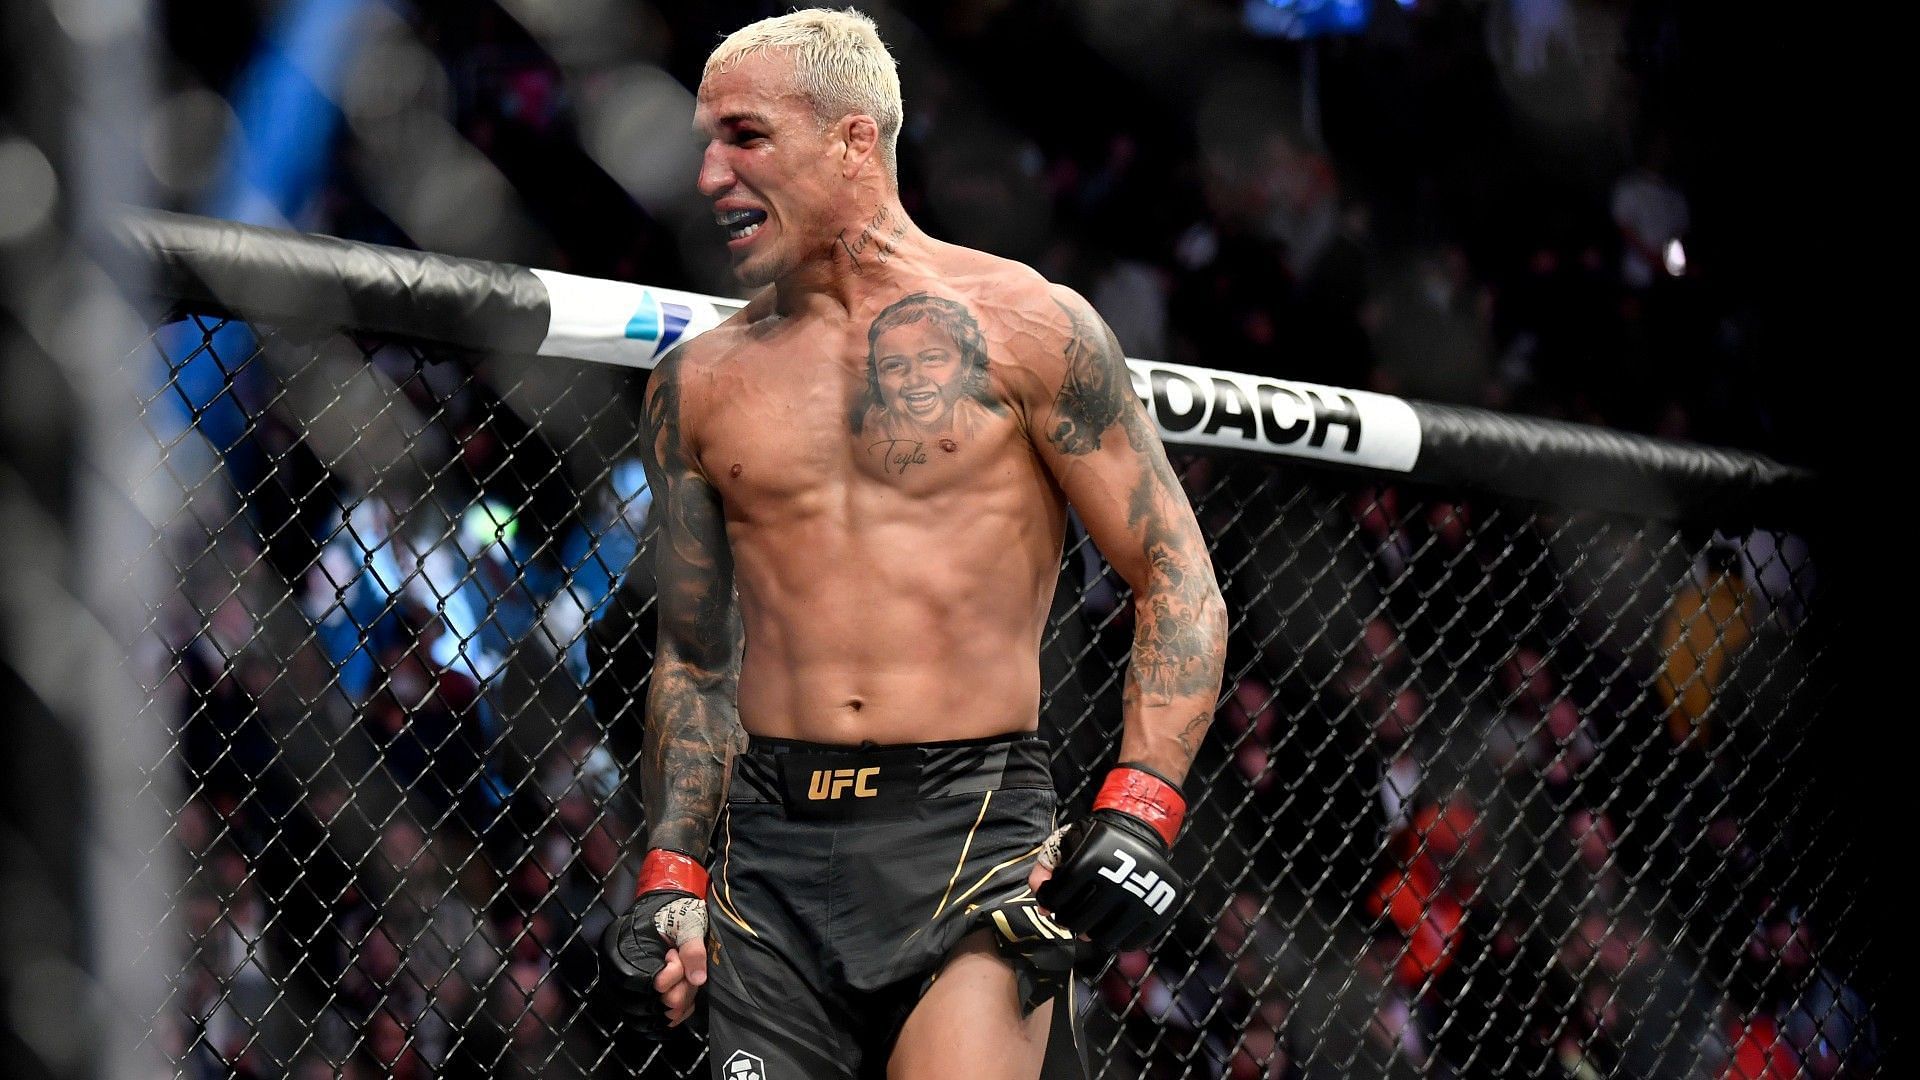 Charles Oliveira&#039;s last fight saw him submit Dustin Poirier with a rear naked choke